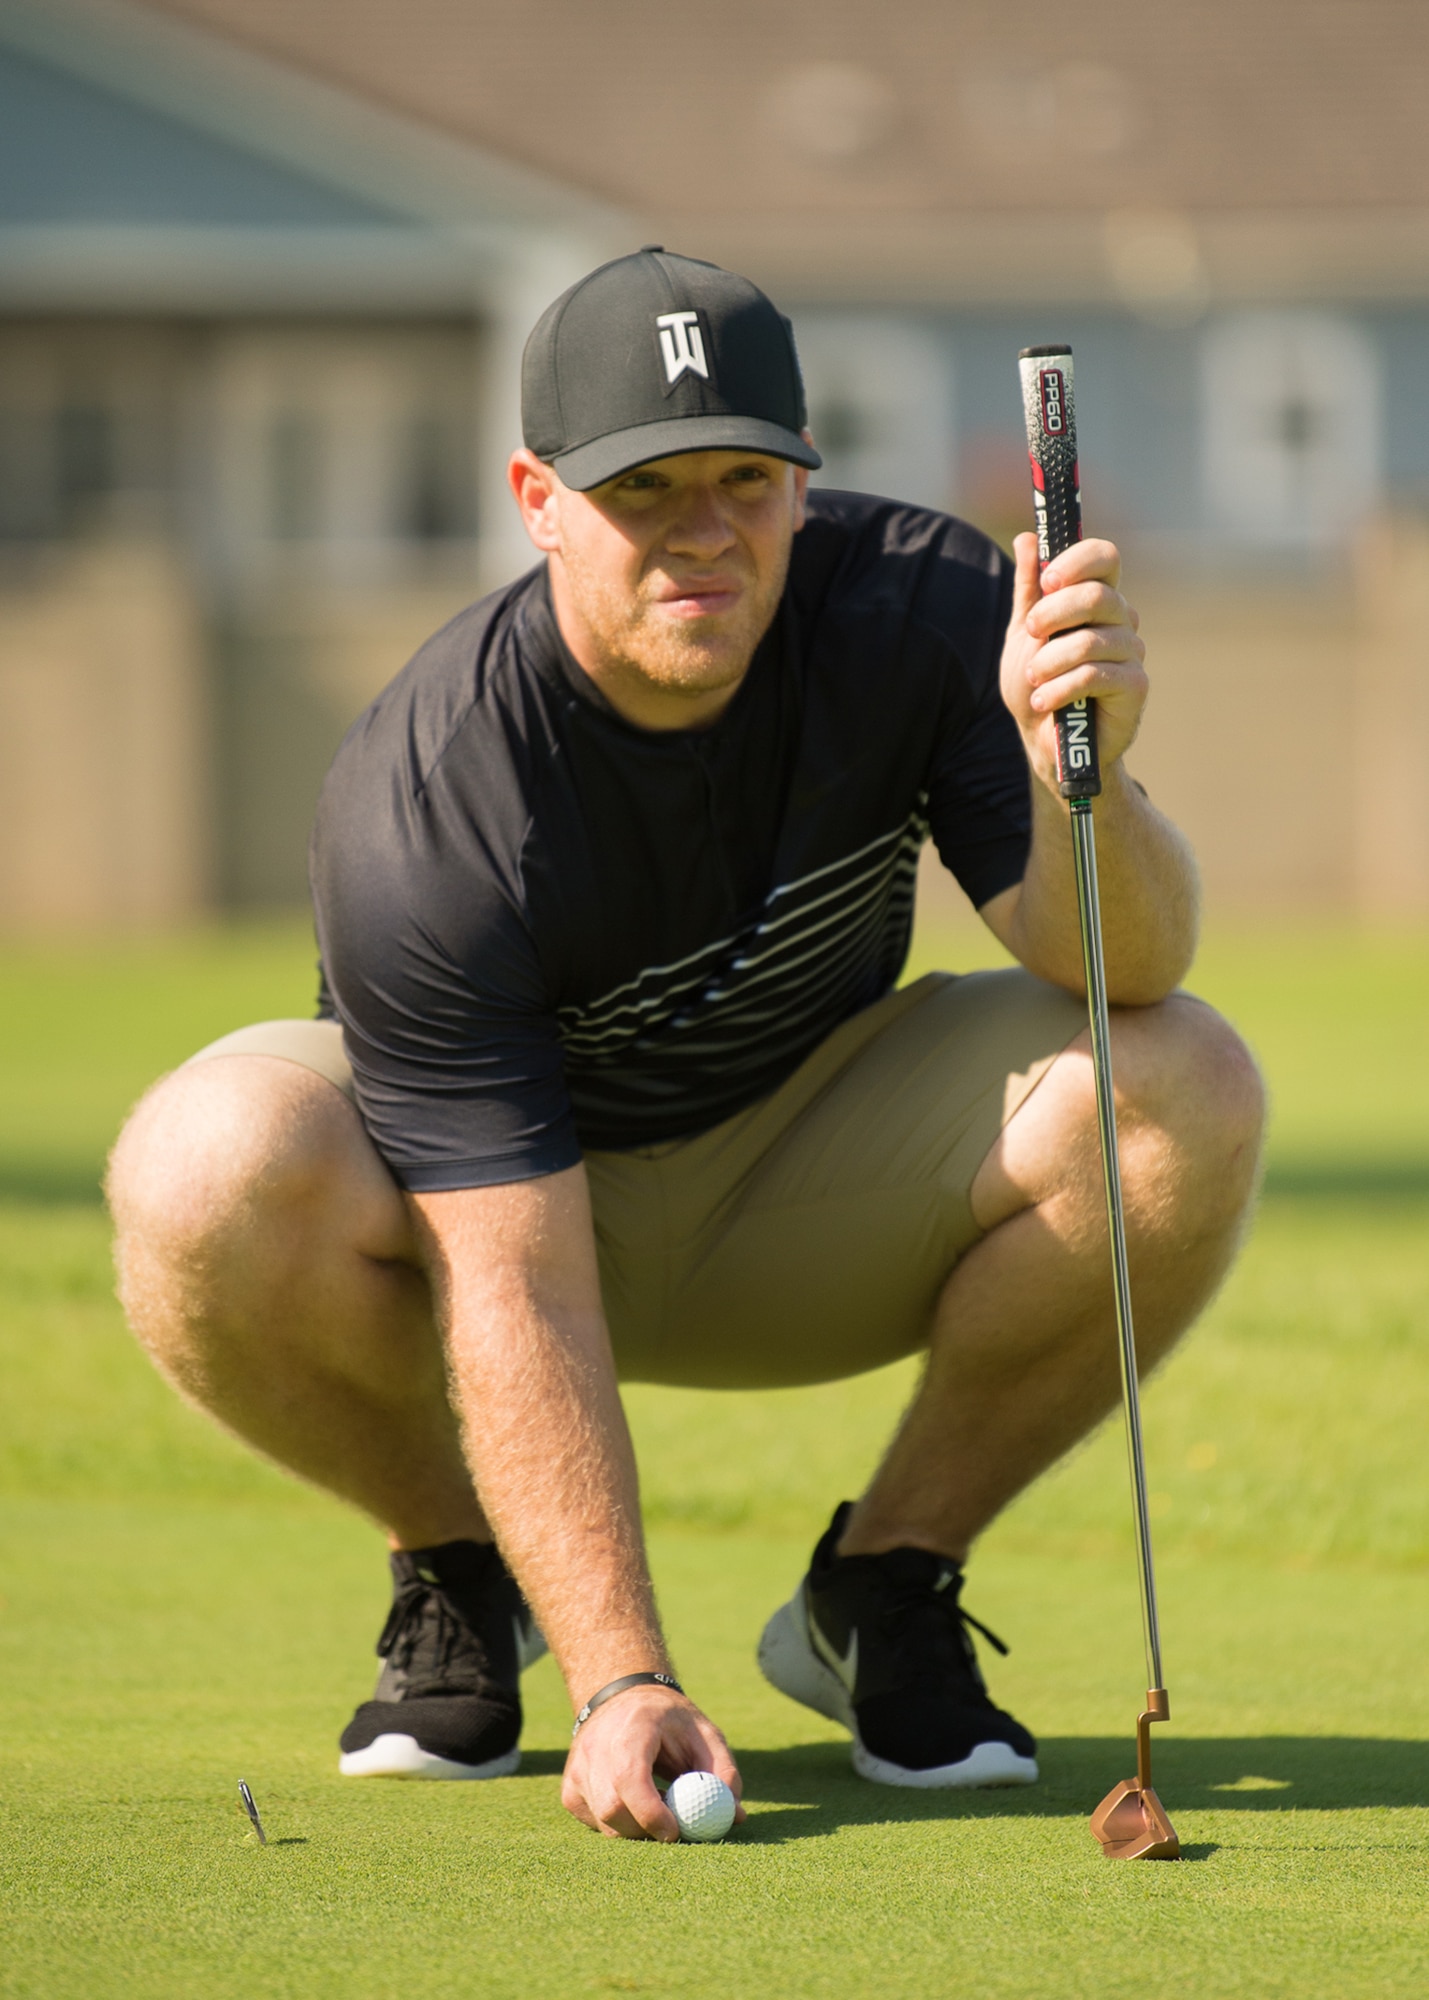 Tyler Kuhn, Dover Federal Credit Union, prepares for a putt at the Bluesuiters Golf Tournament Sept. 19, 2018, at Eagle Creek Golf Course on Dover Air Force Base, Del. The tournament is aimed at creating and maintaining good relations between Team Dover Airmen and the local community.